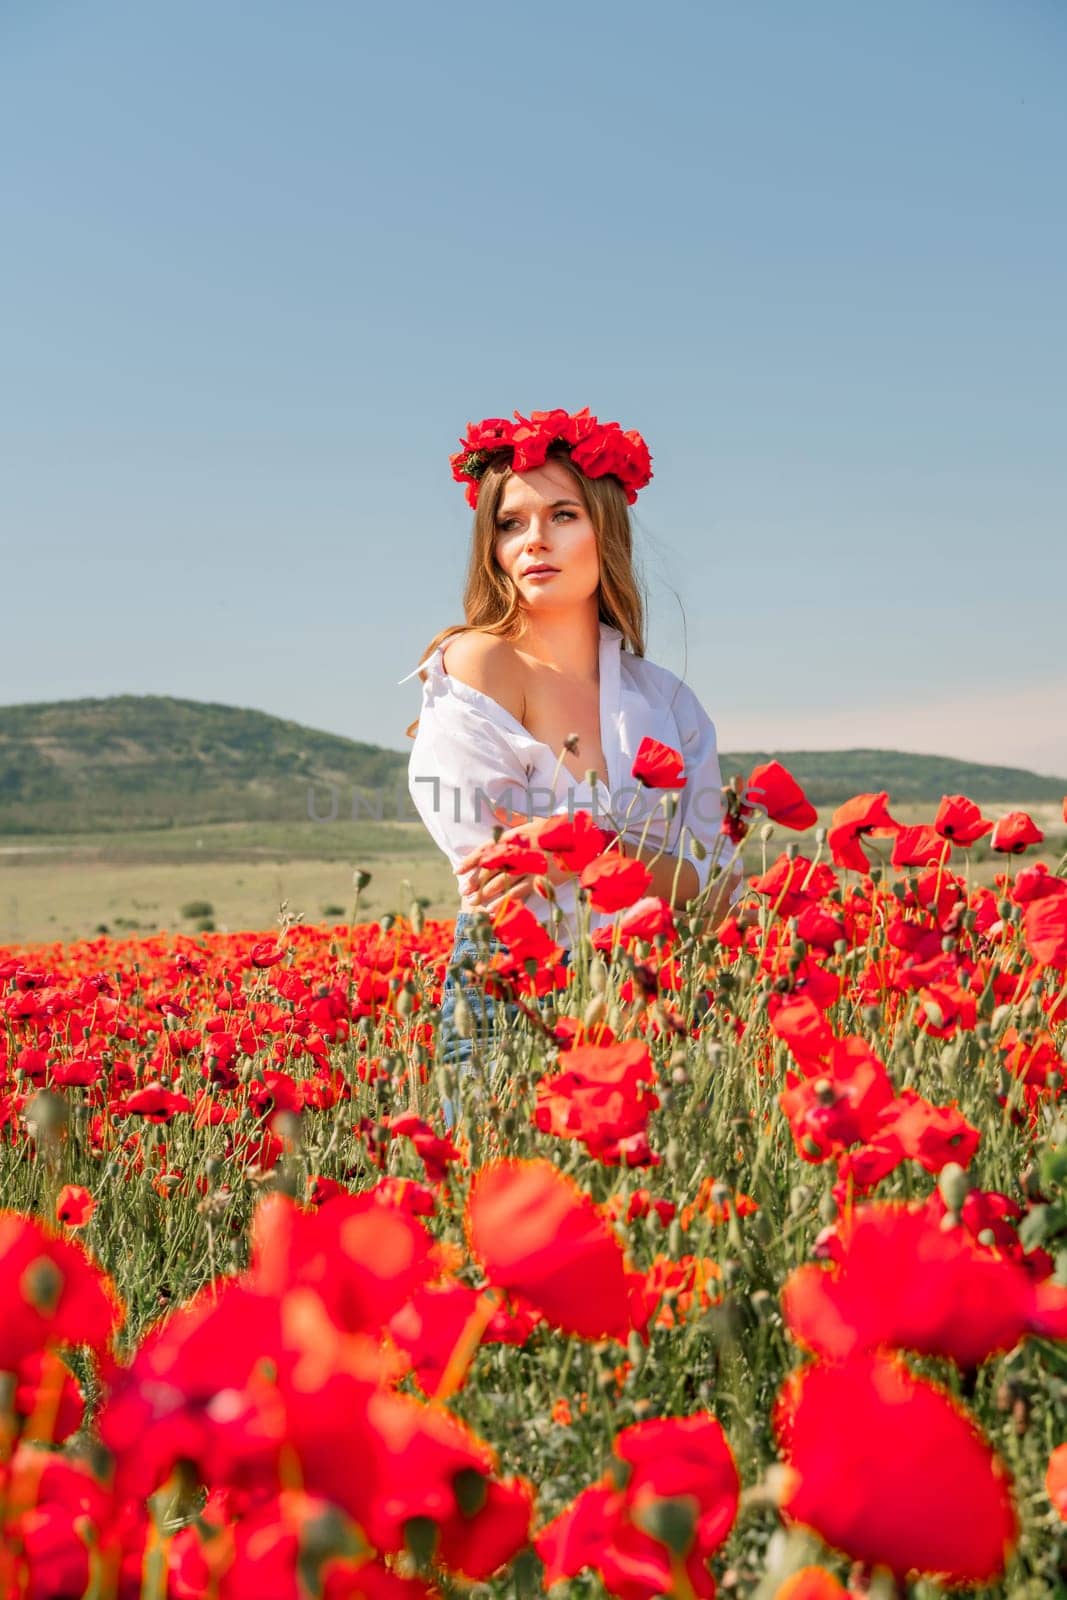 Happy woman in a poppy field in a white shirt and denim skirt with a wreath of poppies on her head posing and enjoying the poppy field